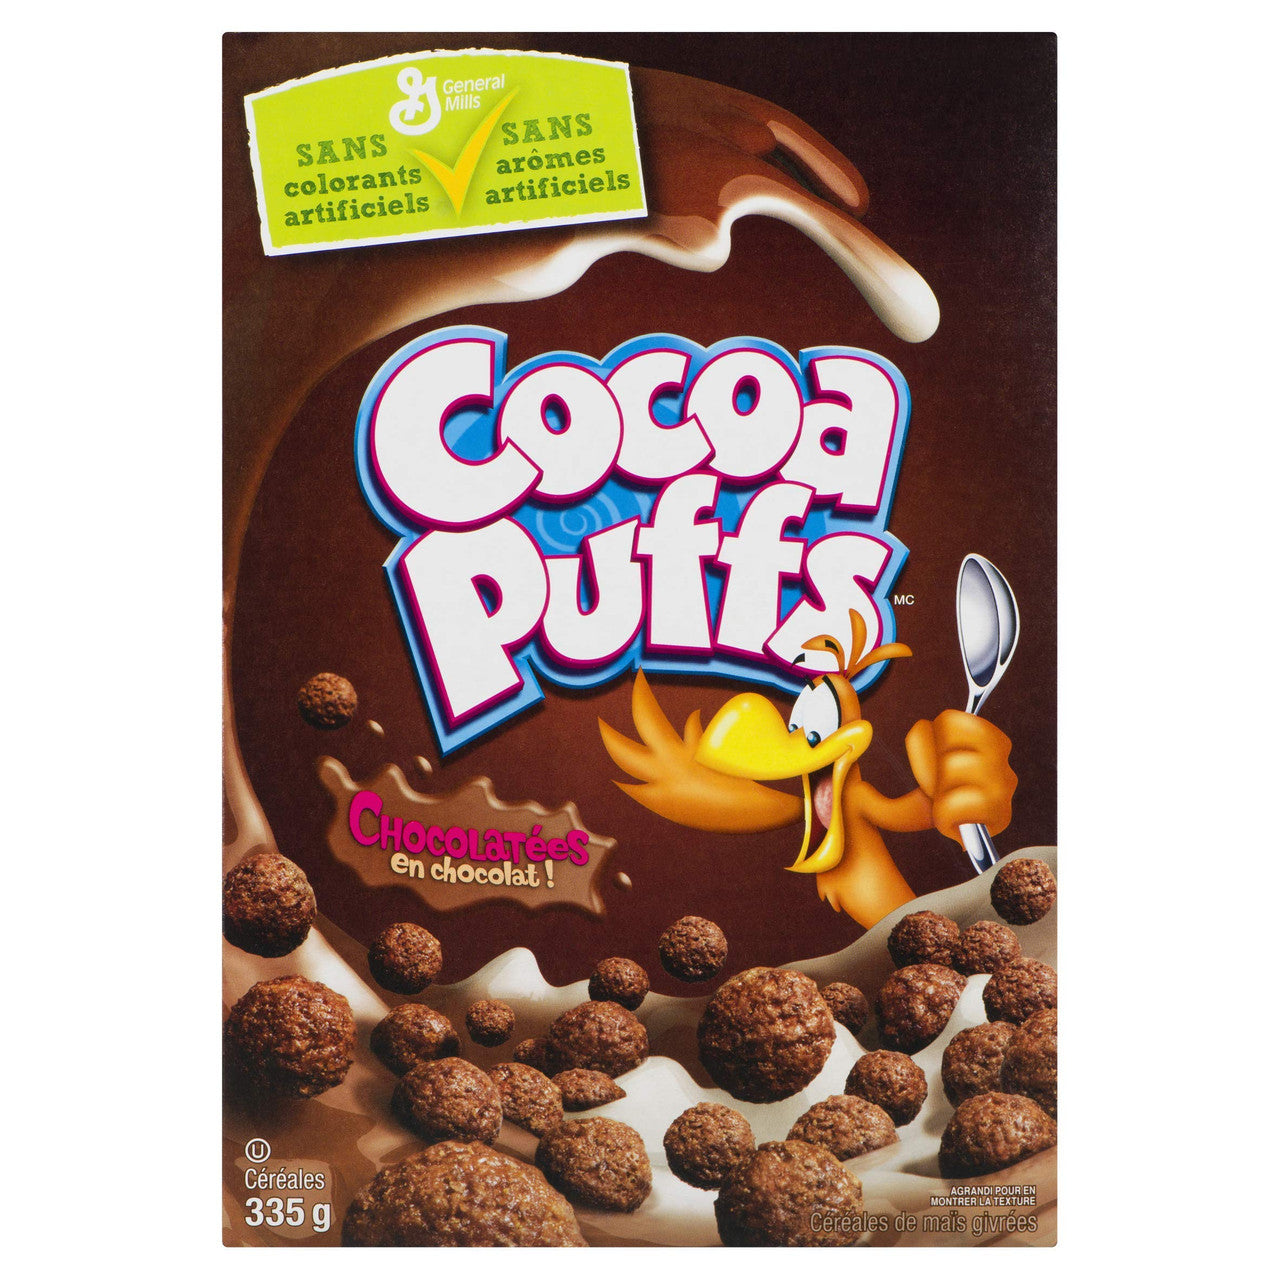 General Mills, Cocoa Puffs Breakfast Cereal, 335g/11.8oz., {Imported from Canada}